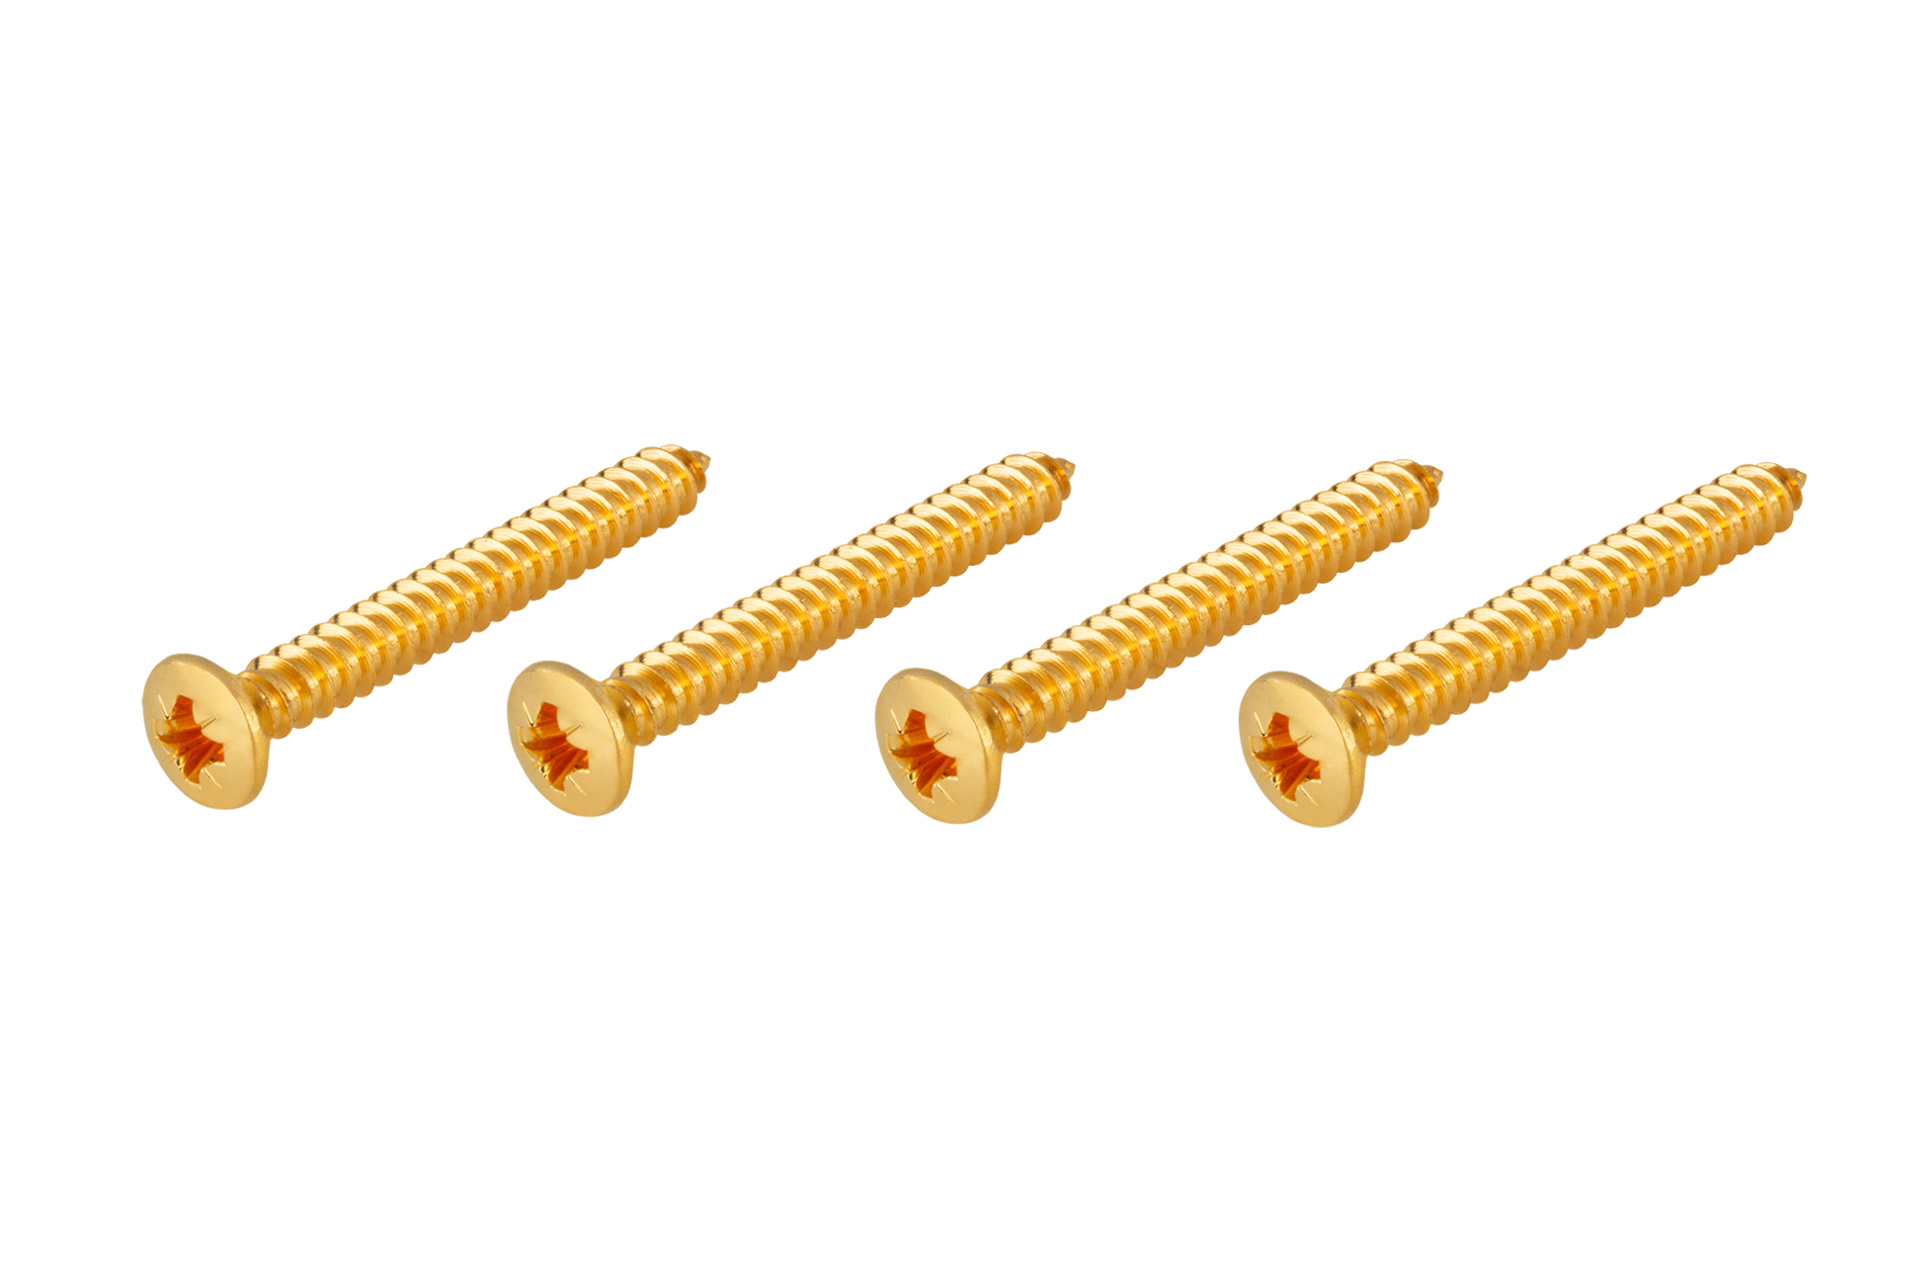 Framus & Warwick Parts - Countersunk Long Screw for Bolt-On Neck, 4,2 mm x 38 mm, 4 pcs. - Gold